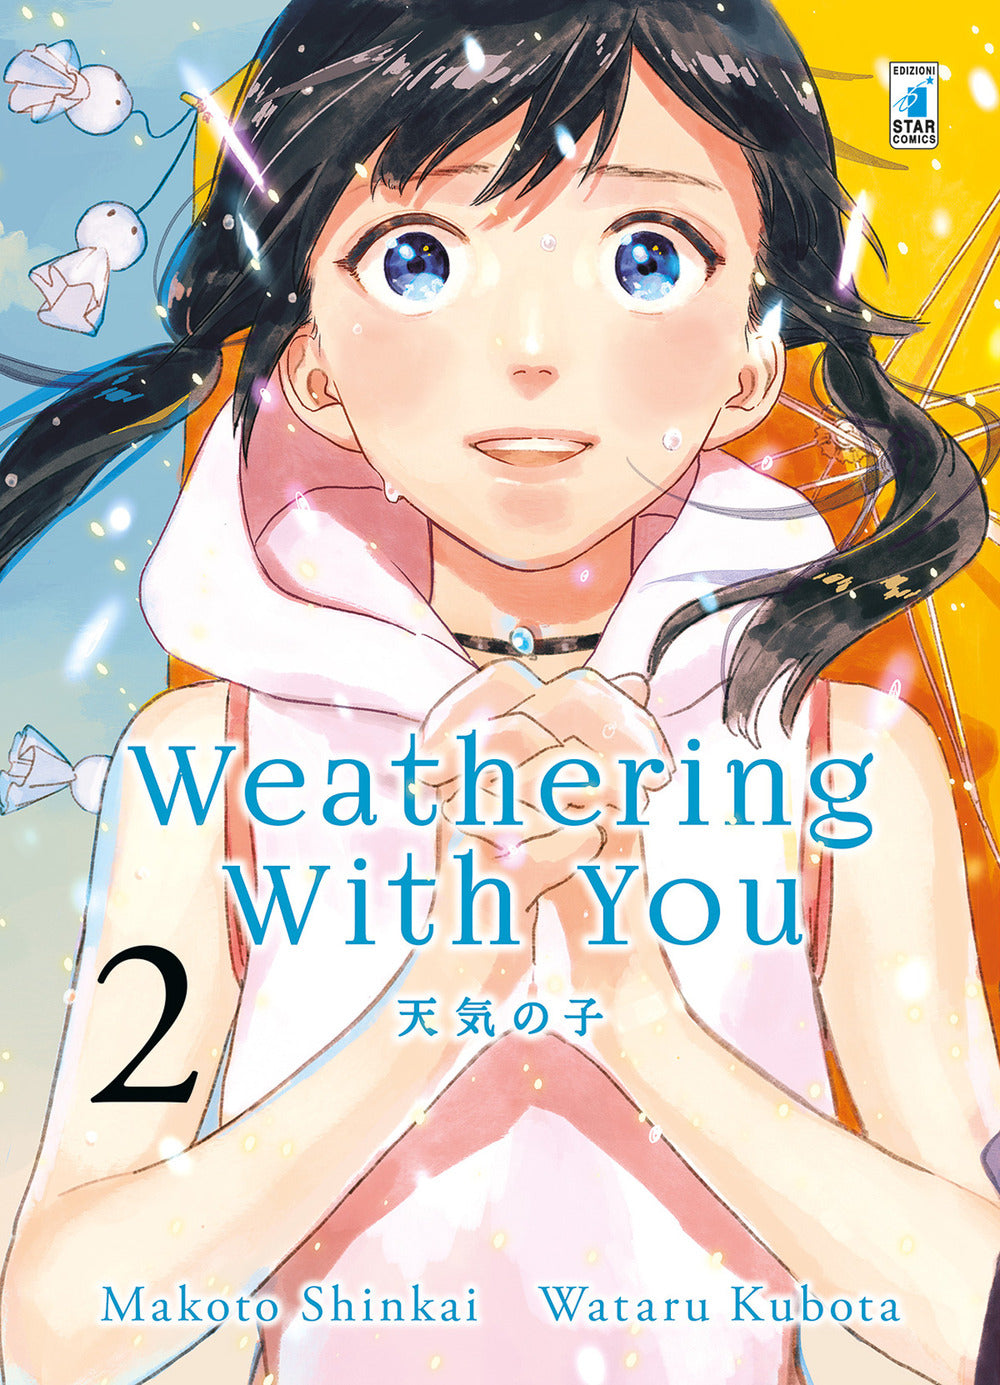 Weathering with you. Vol. 2.